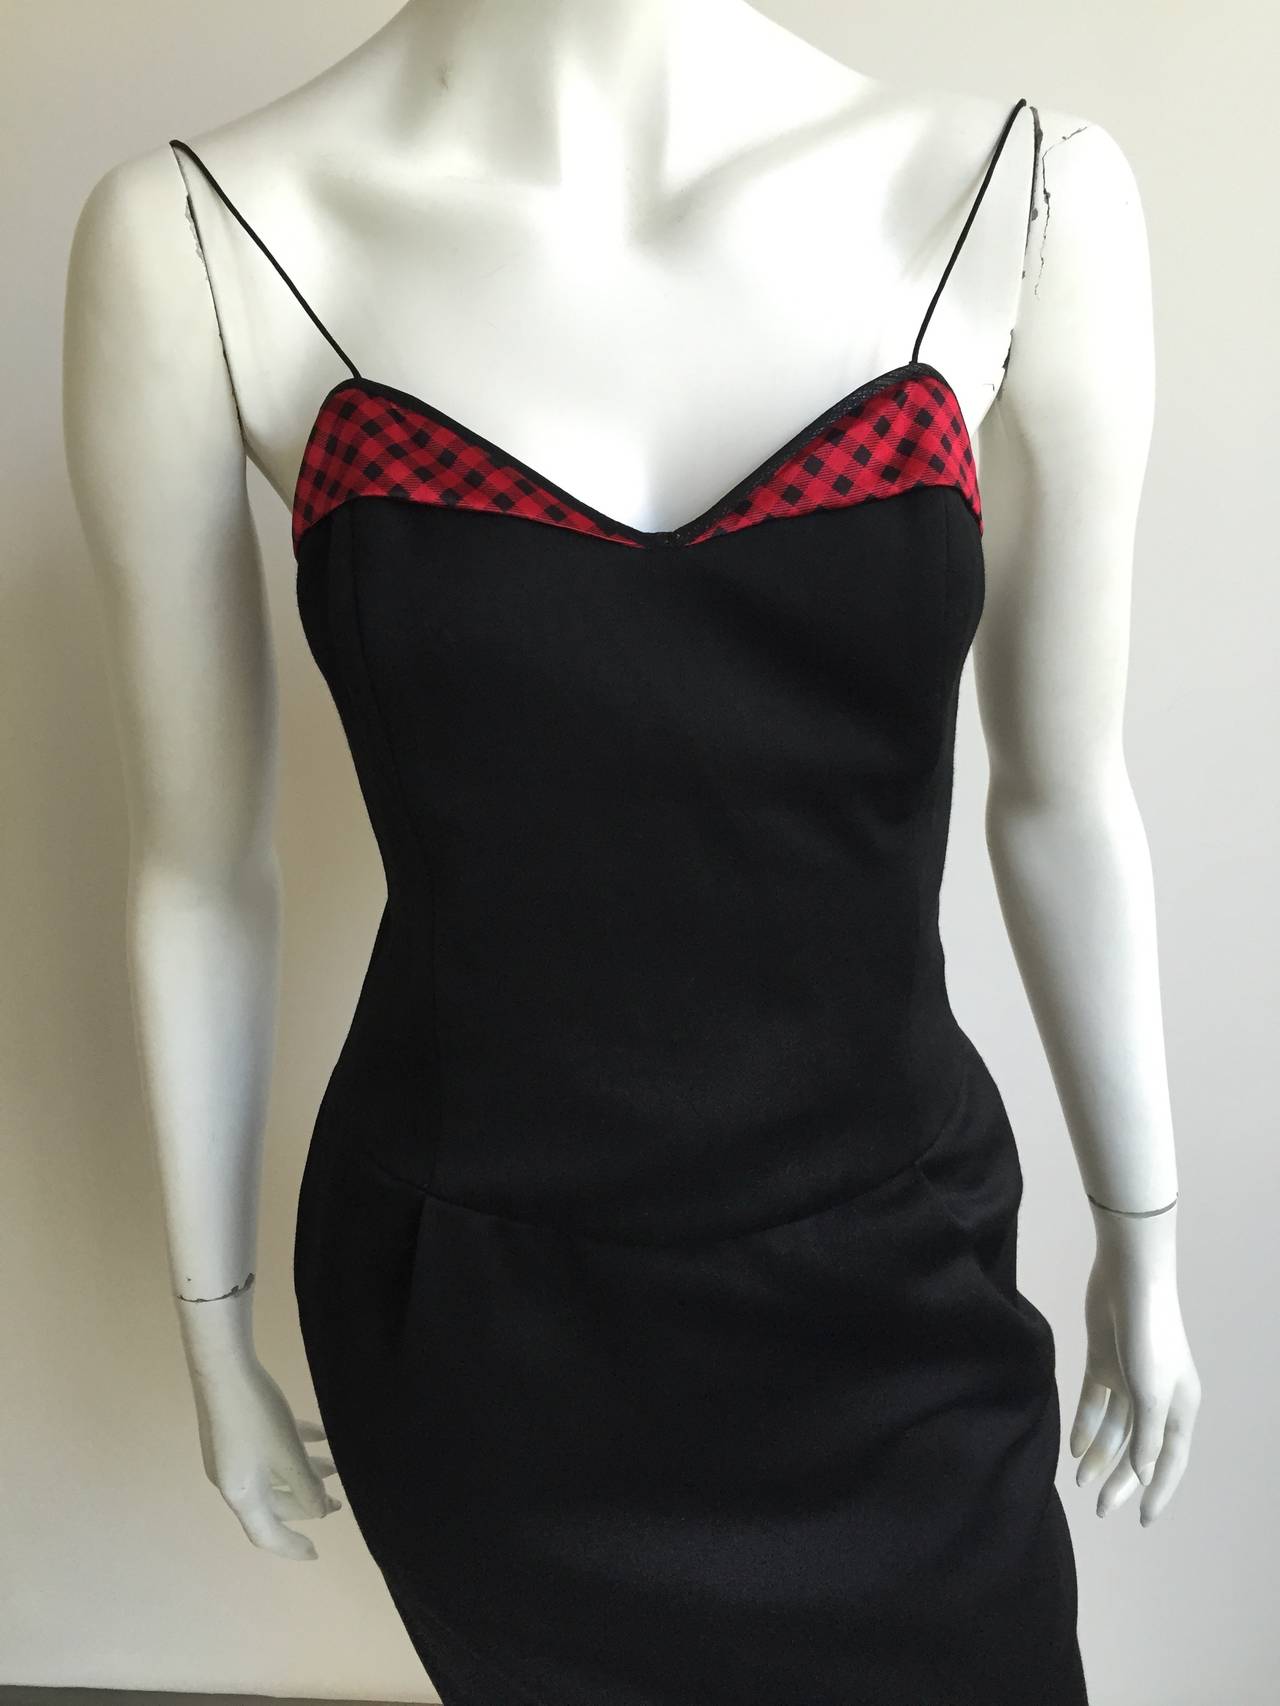 Geoffrey Beene Mr. Beene 1990s black cocktail dress with pockets & plaid trim size 4. This is your gorgeous LBD perfect for any occasion and the plaid top trim gives it that extra punch. No one could ever accuse the lady who wears this dress of